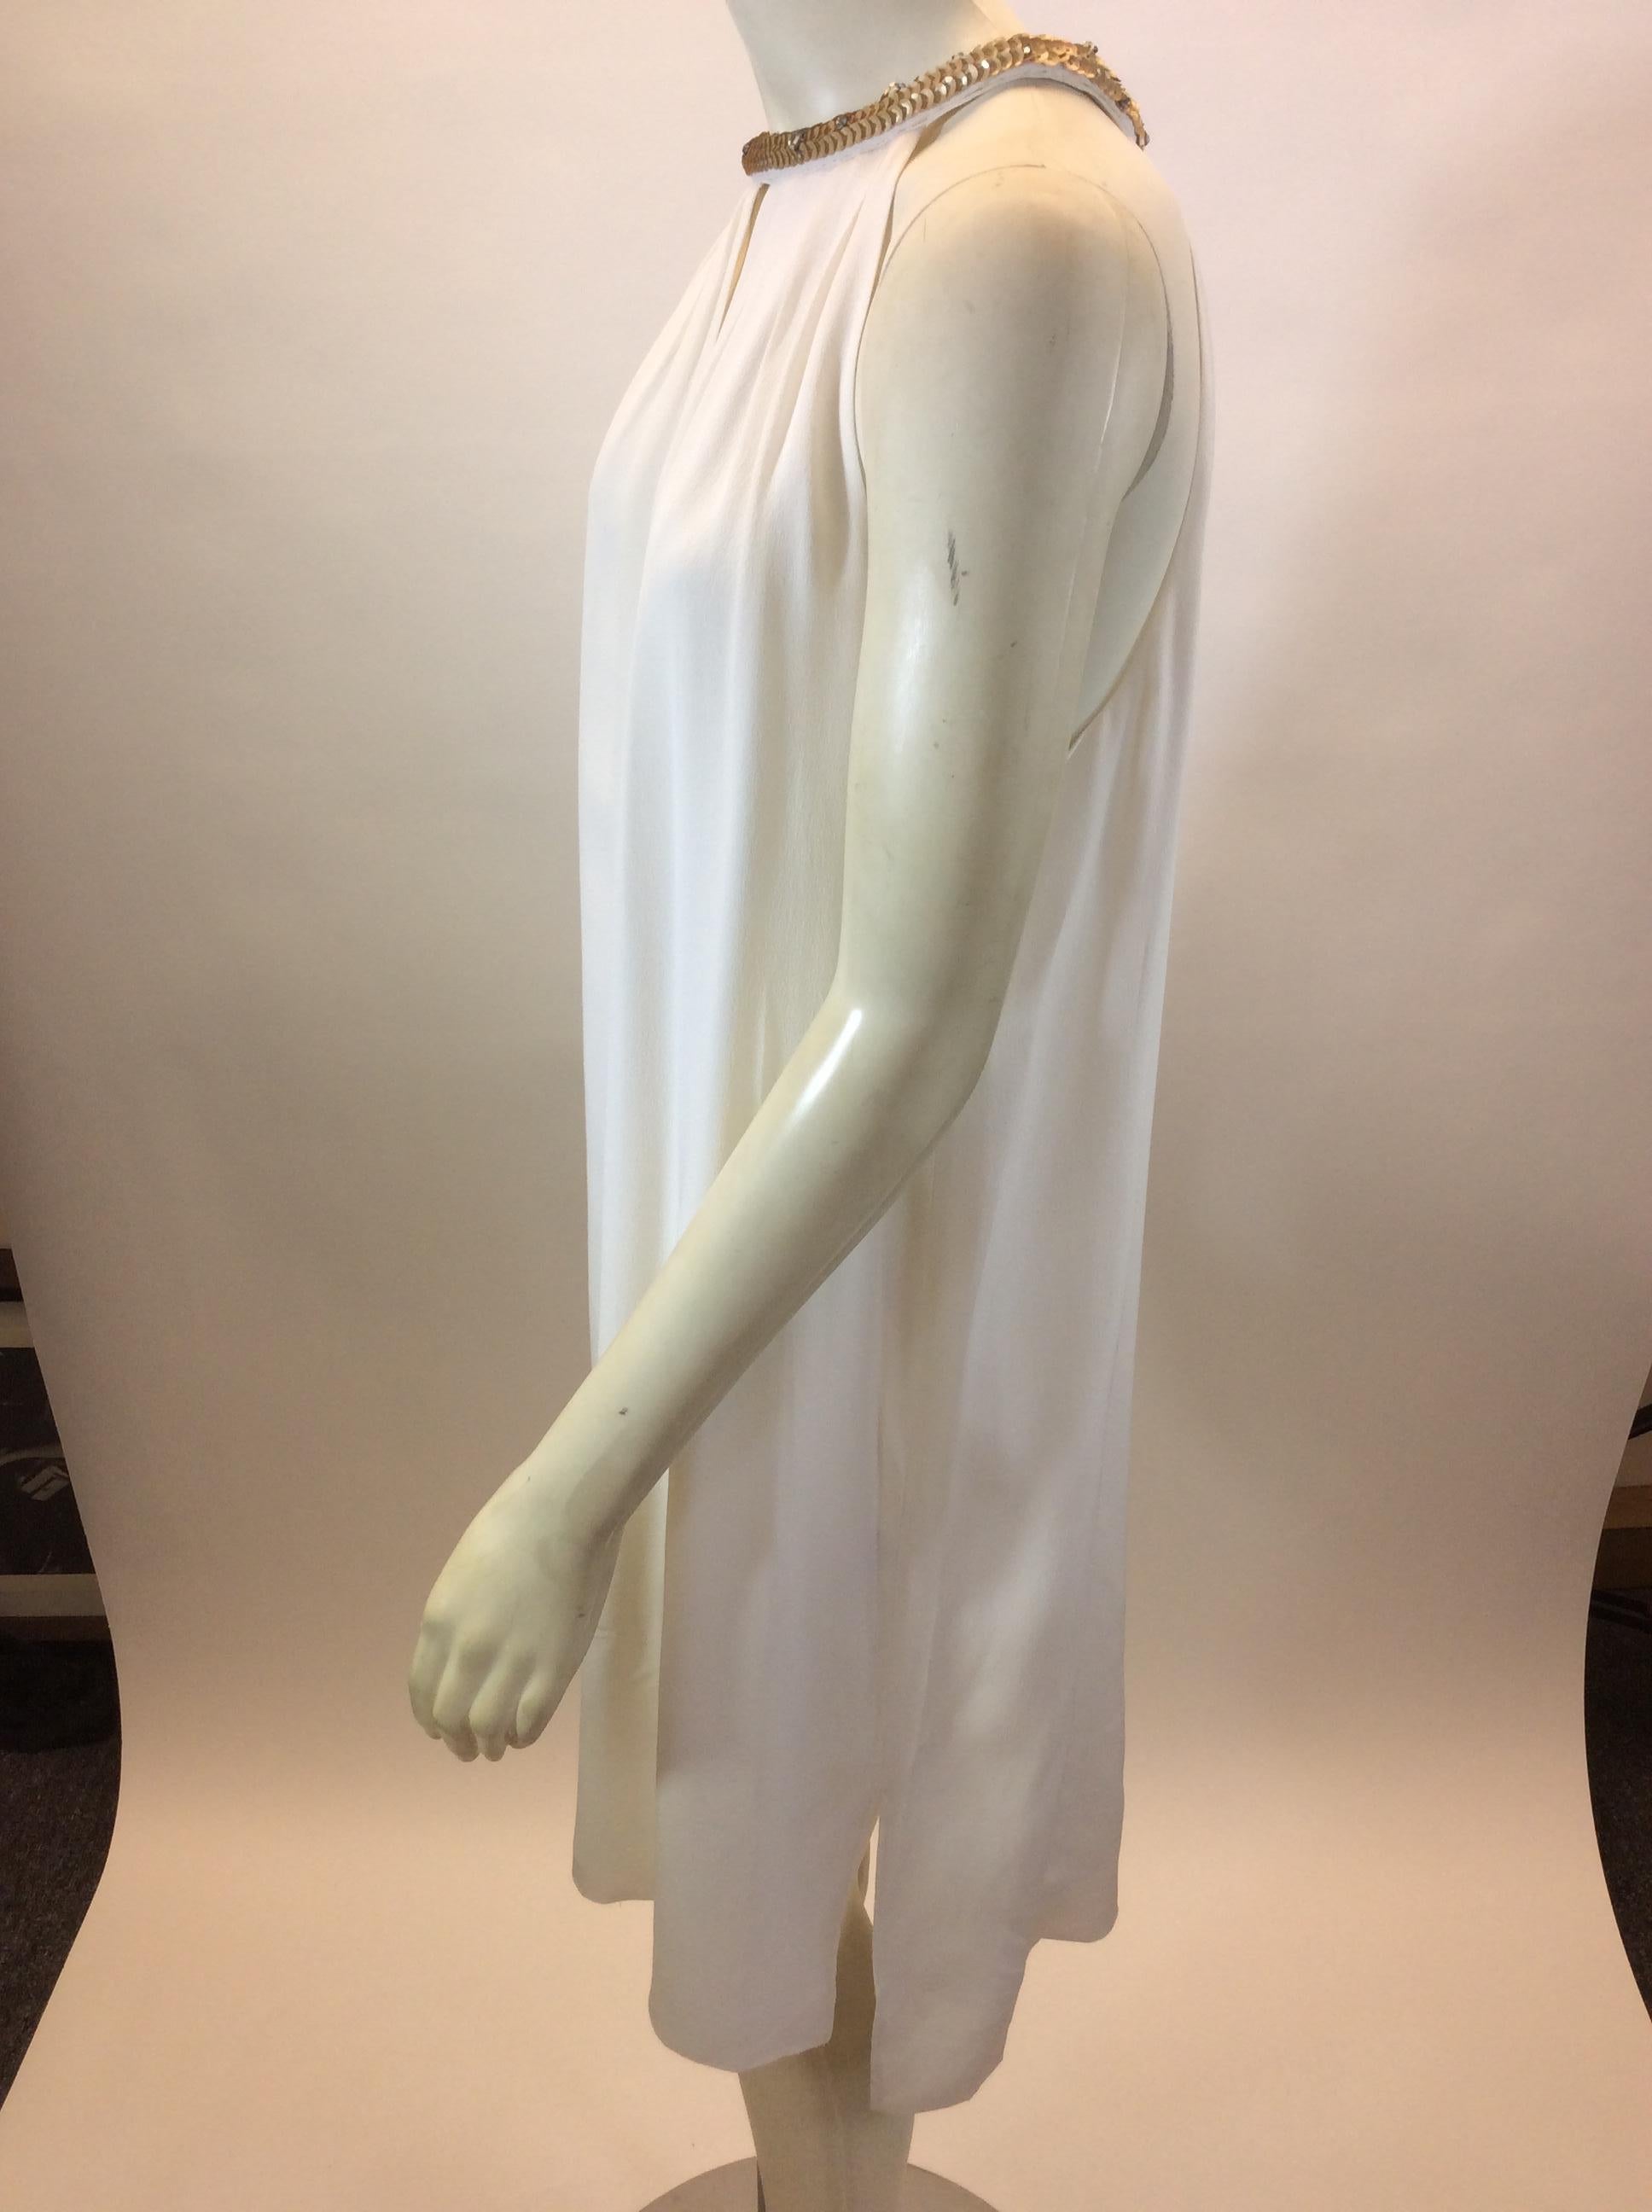 Rebecca Taylor White Dress with Gold Beaded Trim NWT
$265
Made in China
100% Silk
Size 10
Length 36